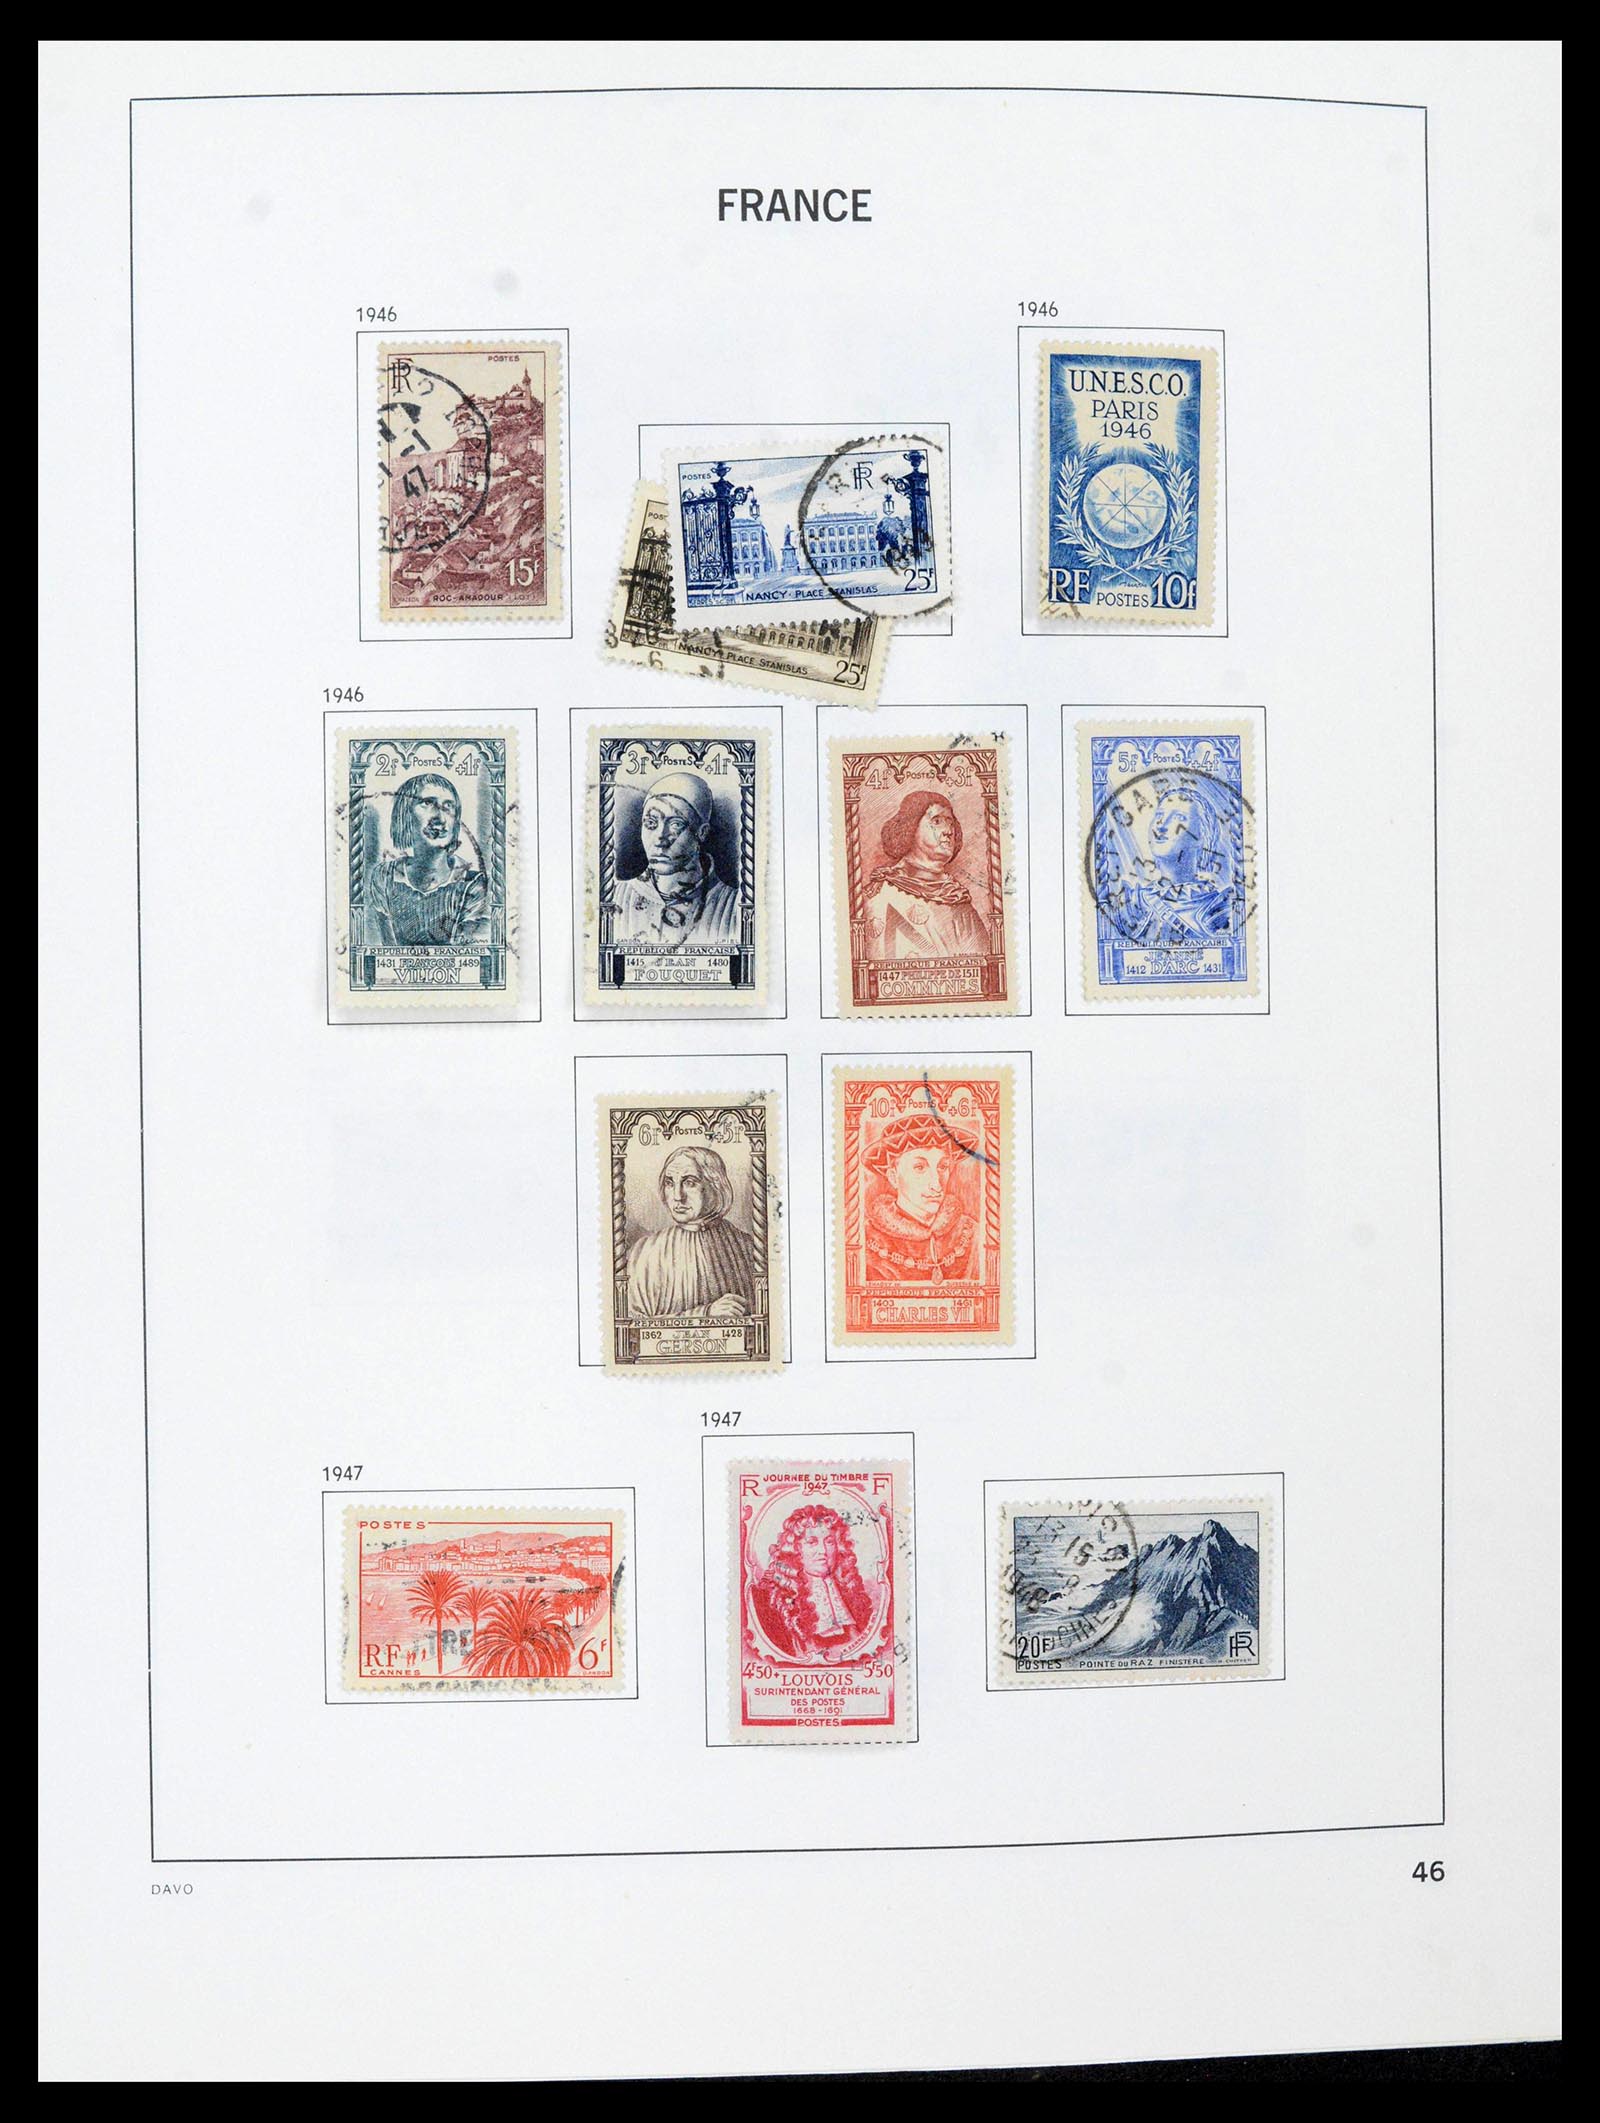 39164 0046 - Stamp collection 39164 France 1849-1981.